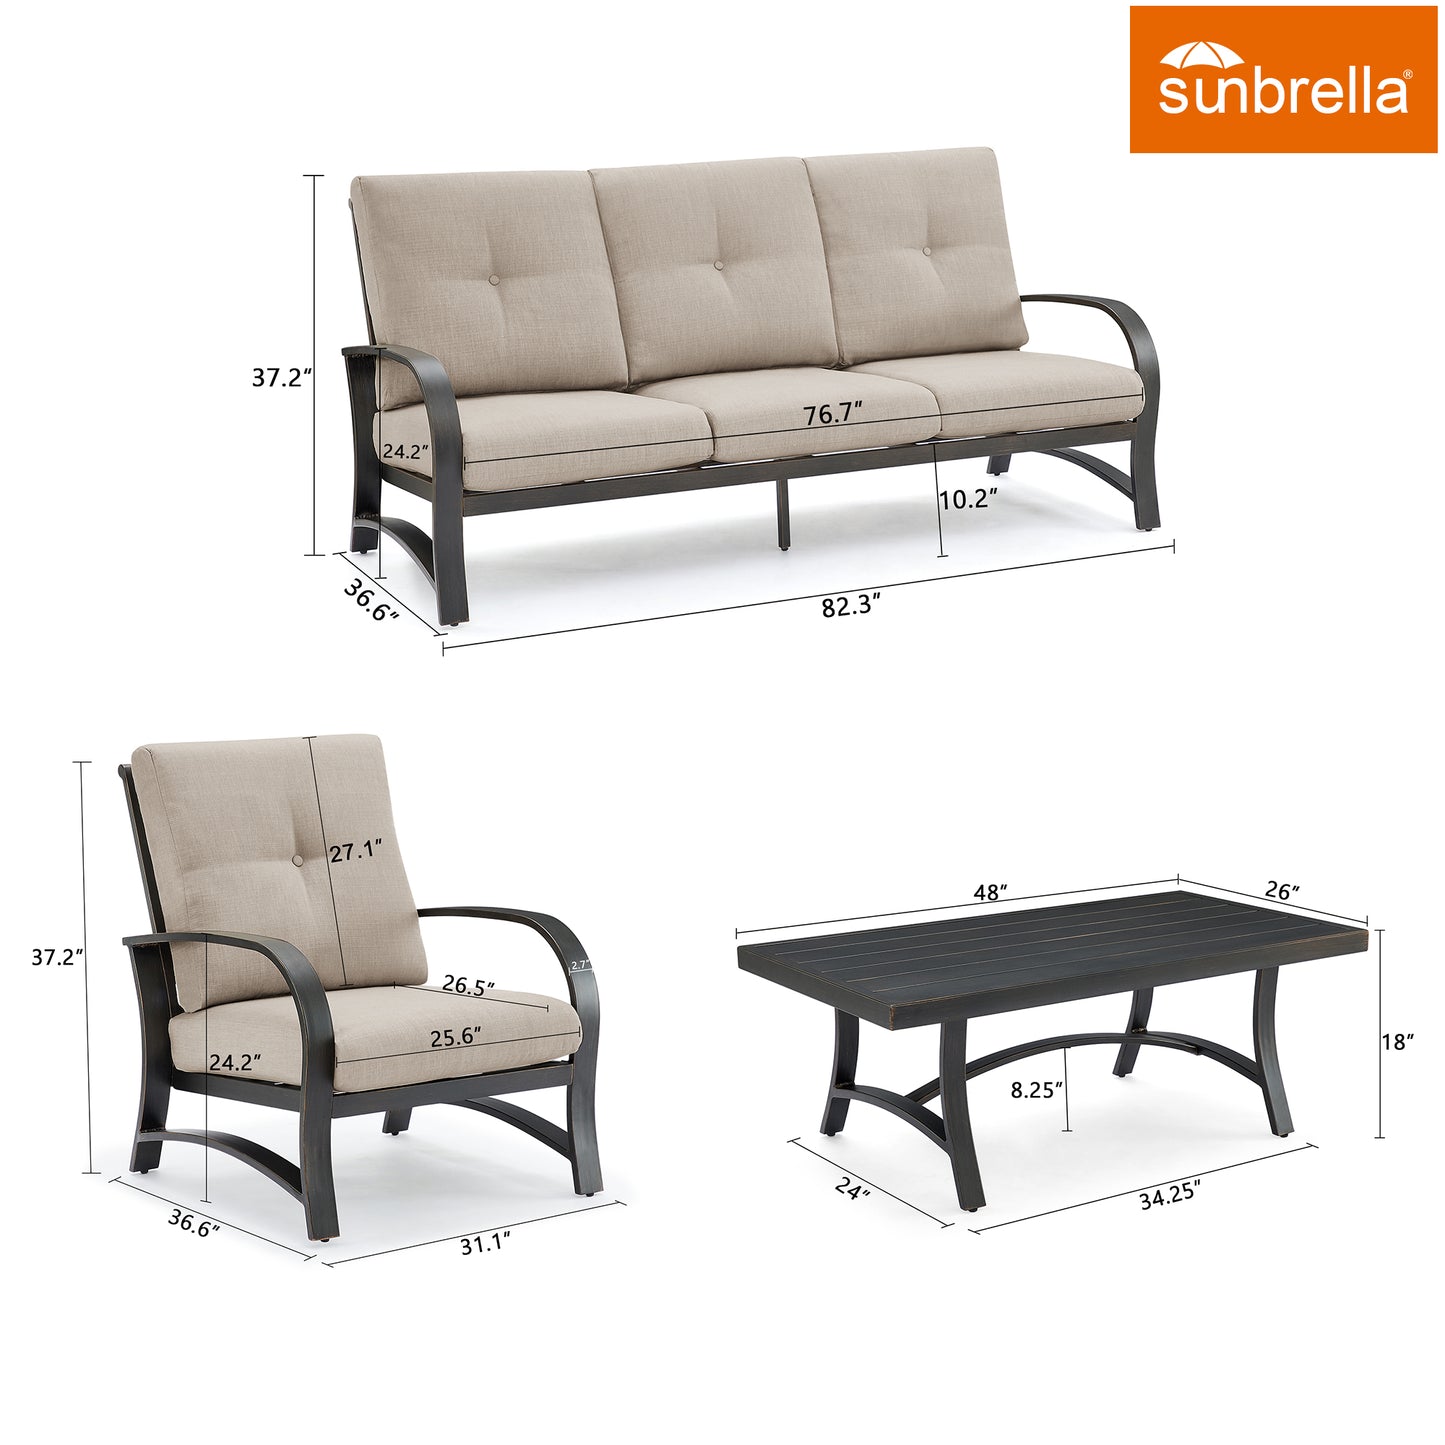 3 Pieces Outdoor/Indoor Aluminum Patio Conversation Seating Group with Sunbrella Cushions and Coffee Table for 4 Person